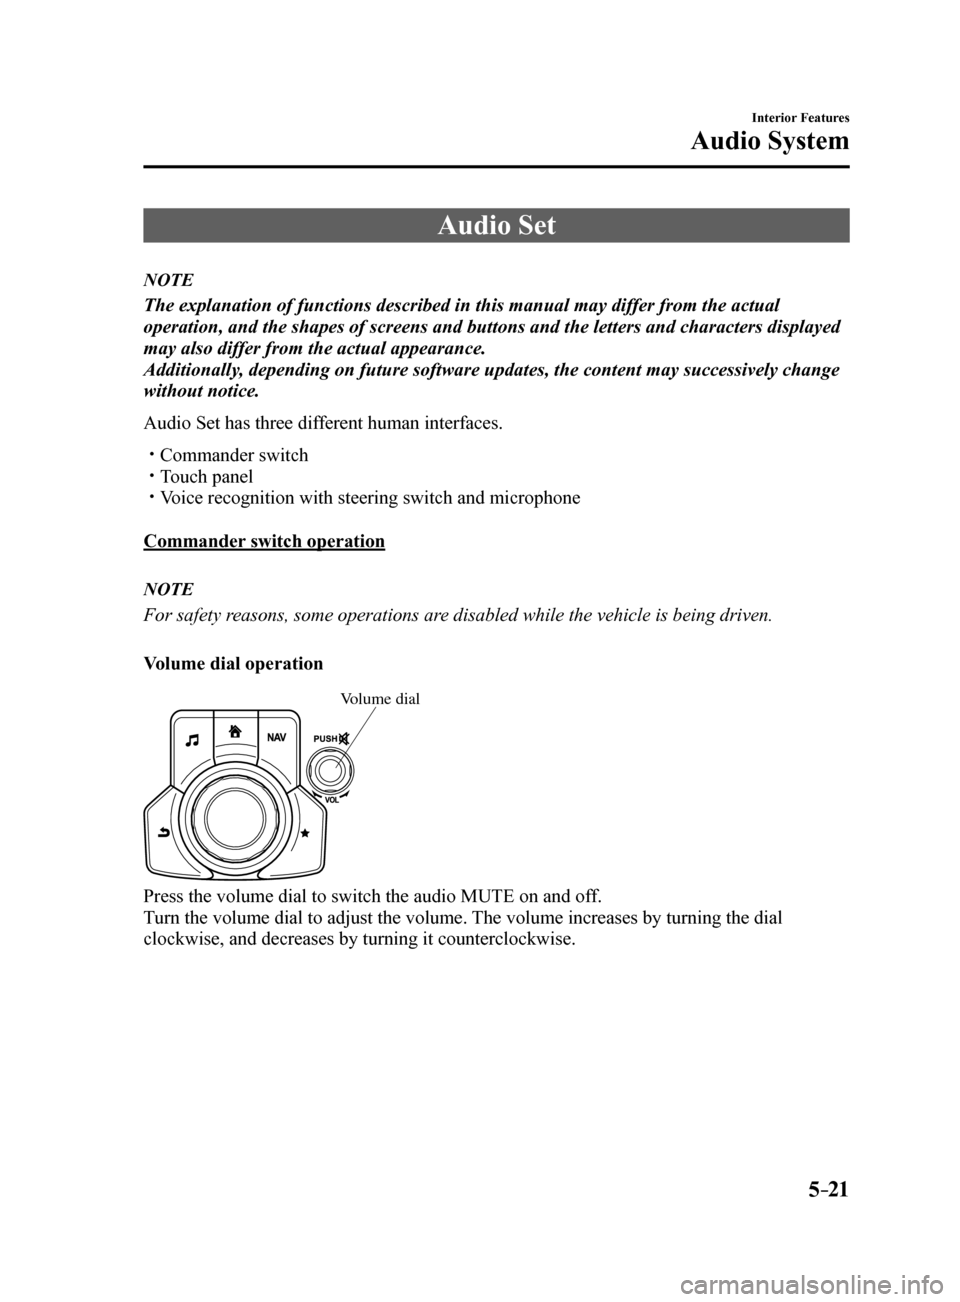 MAZDA MODEL 6 2017  Owners Manual (in English) 5–21
Interior Features
Audio System
Audio Set
NOTE
The explanation of functions described in this manual may differ from the actual 
operation, and the shapes of screens and buttons and the letters 